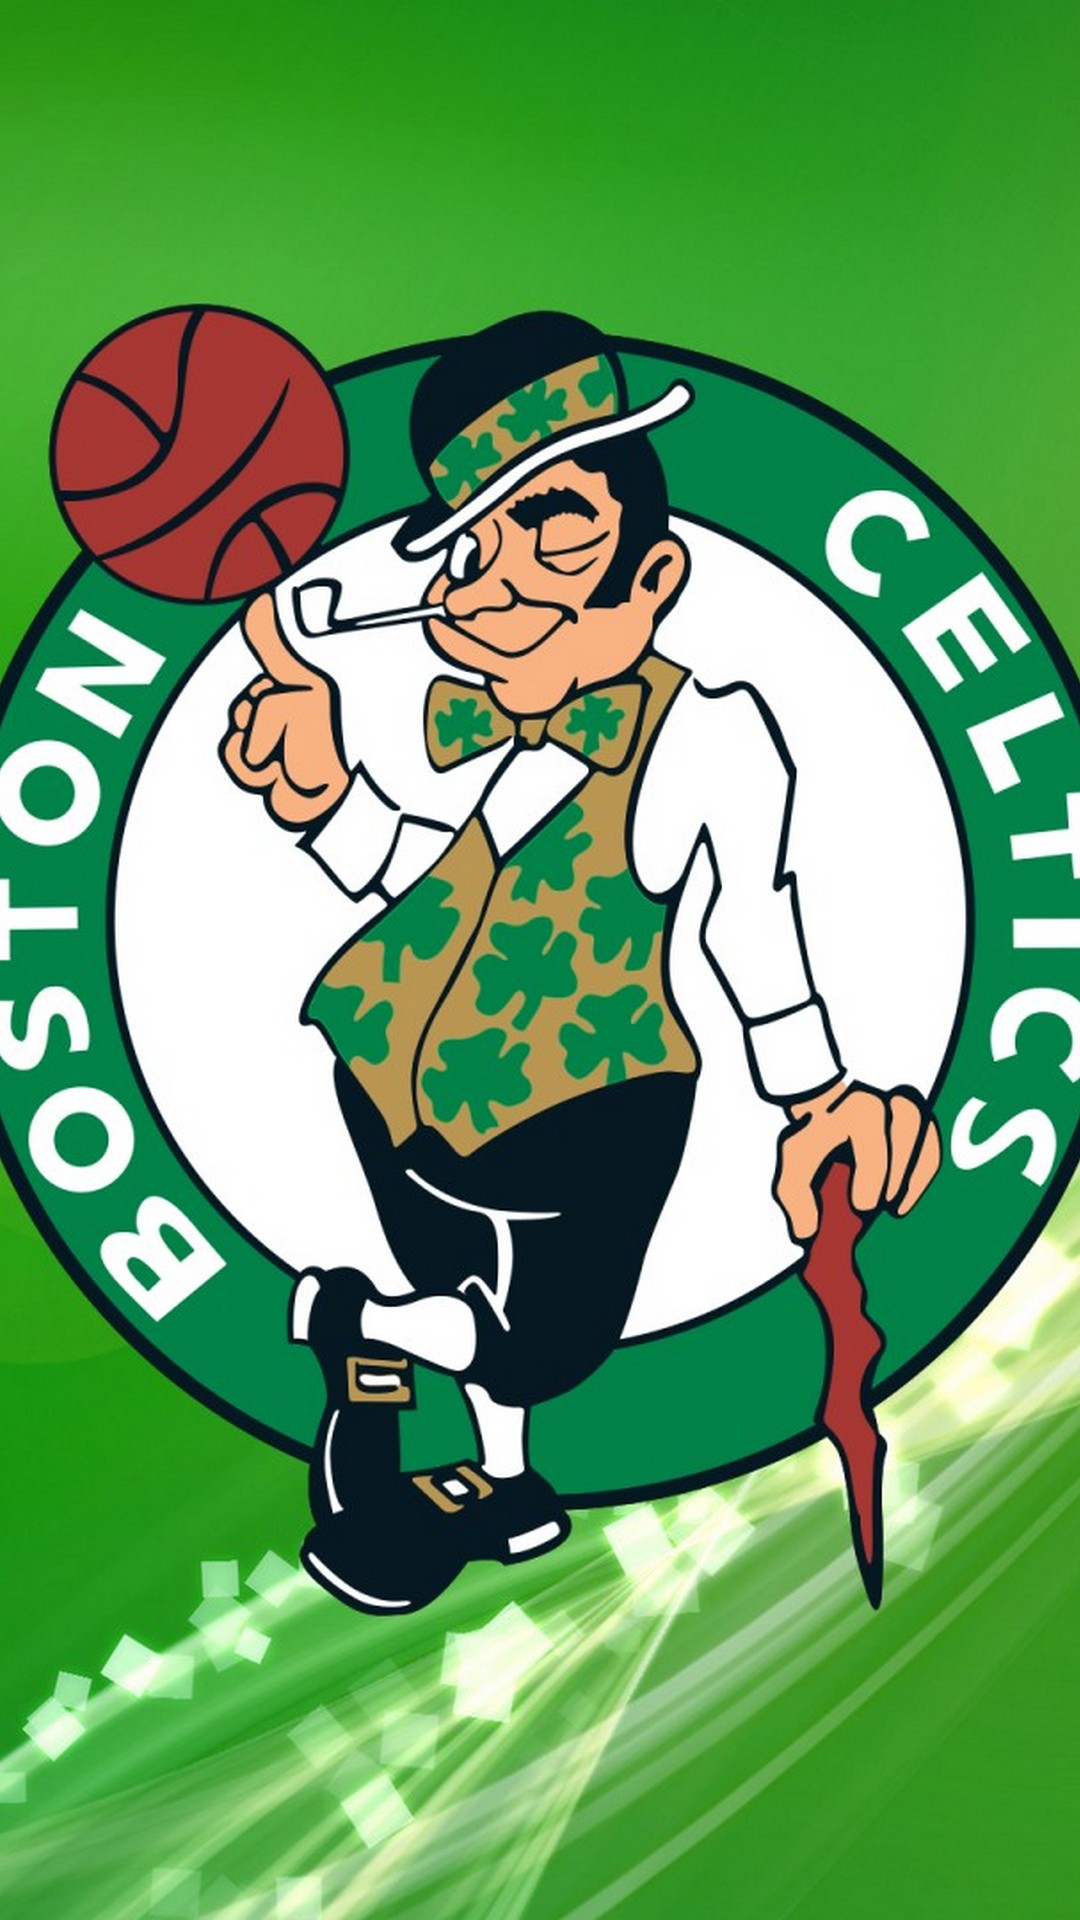 iPhone 8 Wallpaper Boston Celtics with image resolution 1080x1920 pixel. You can make this wallpaper for your iPhone 5, 6, 7, 8, X backgrounds, Mobile Screensaver, or iPad Lock Screen